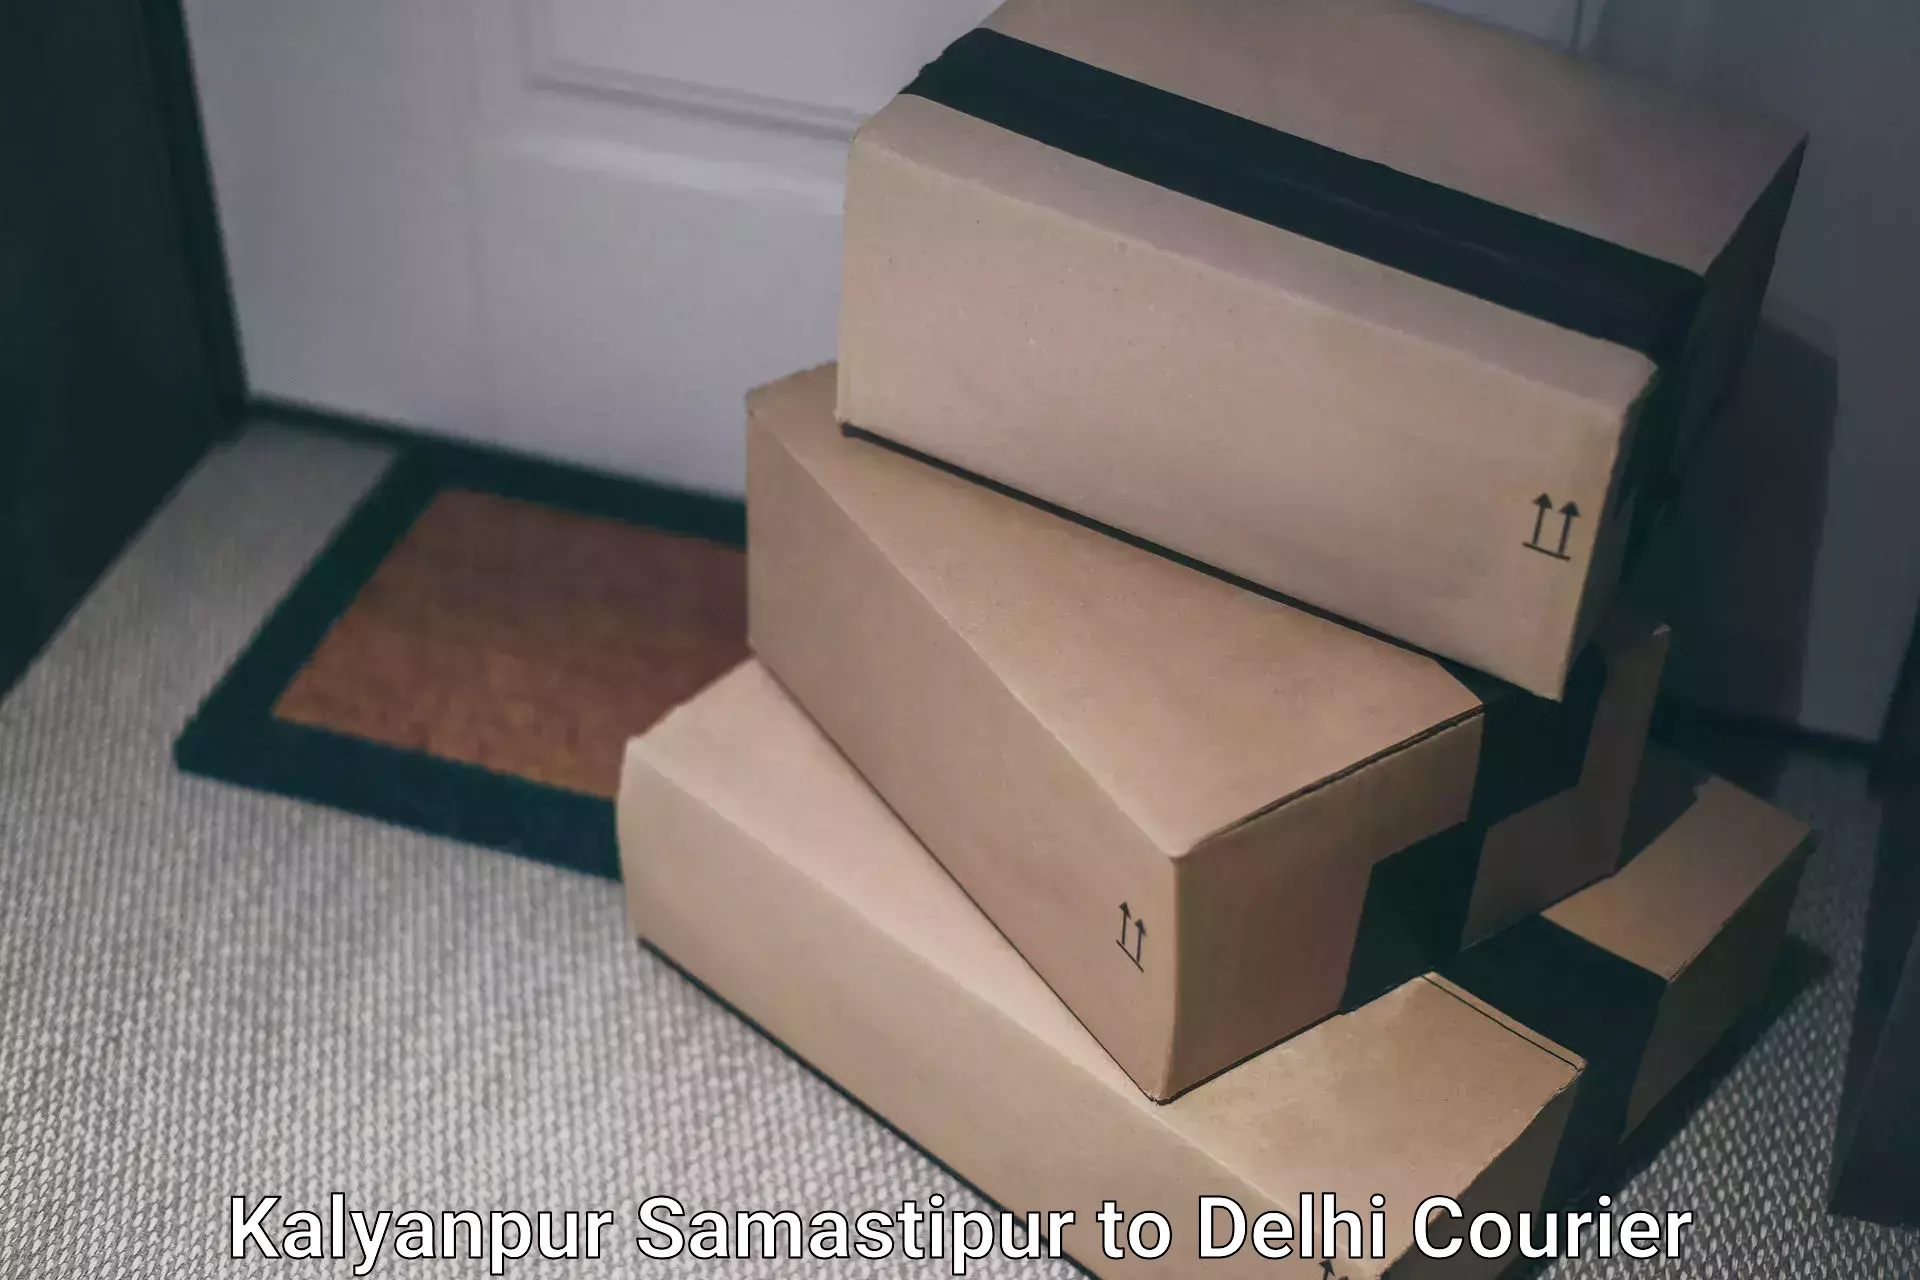 Comprehensive shipping network Kalyanpur Samastipur to NCR